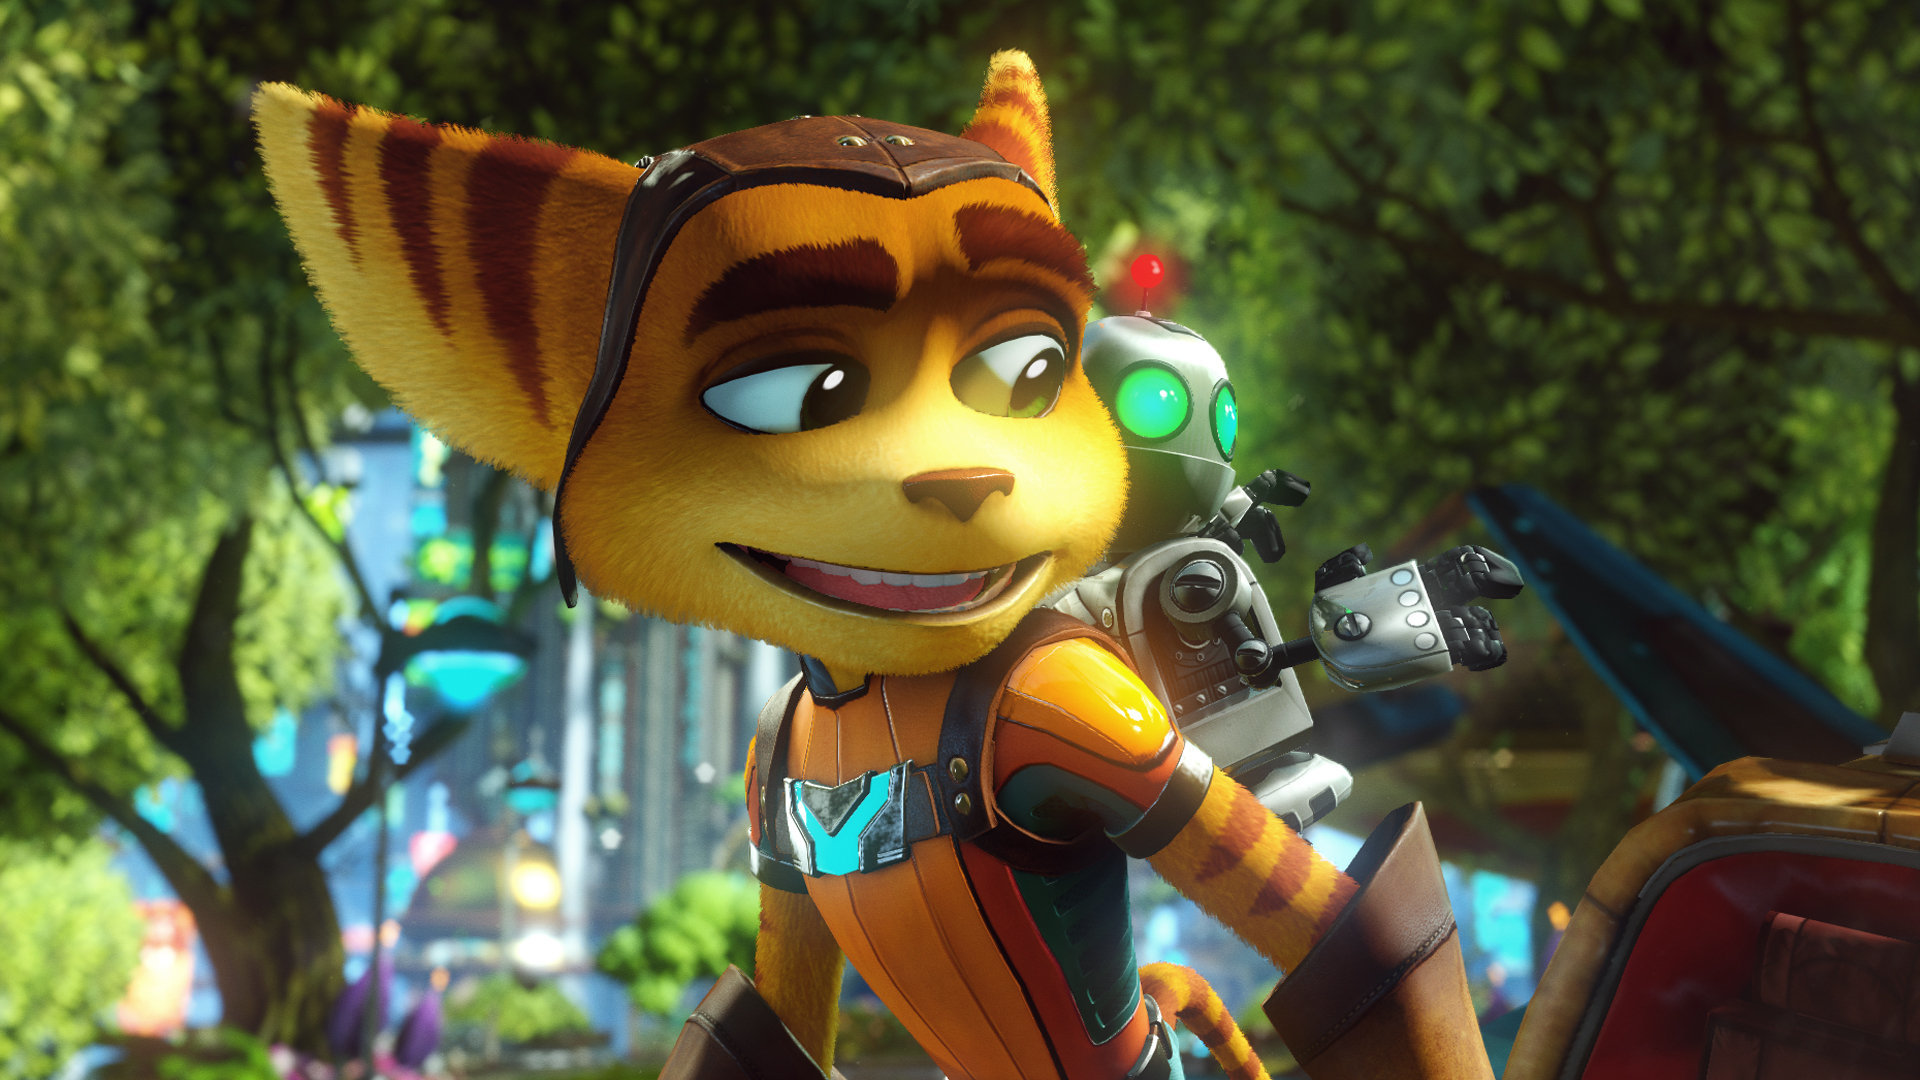 download ratchet and clank 2 for pc